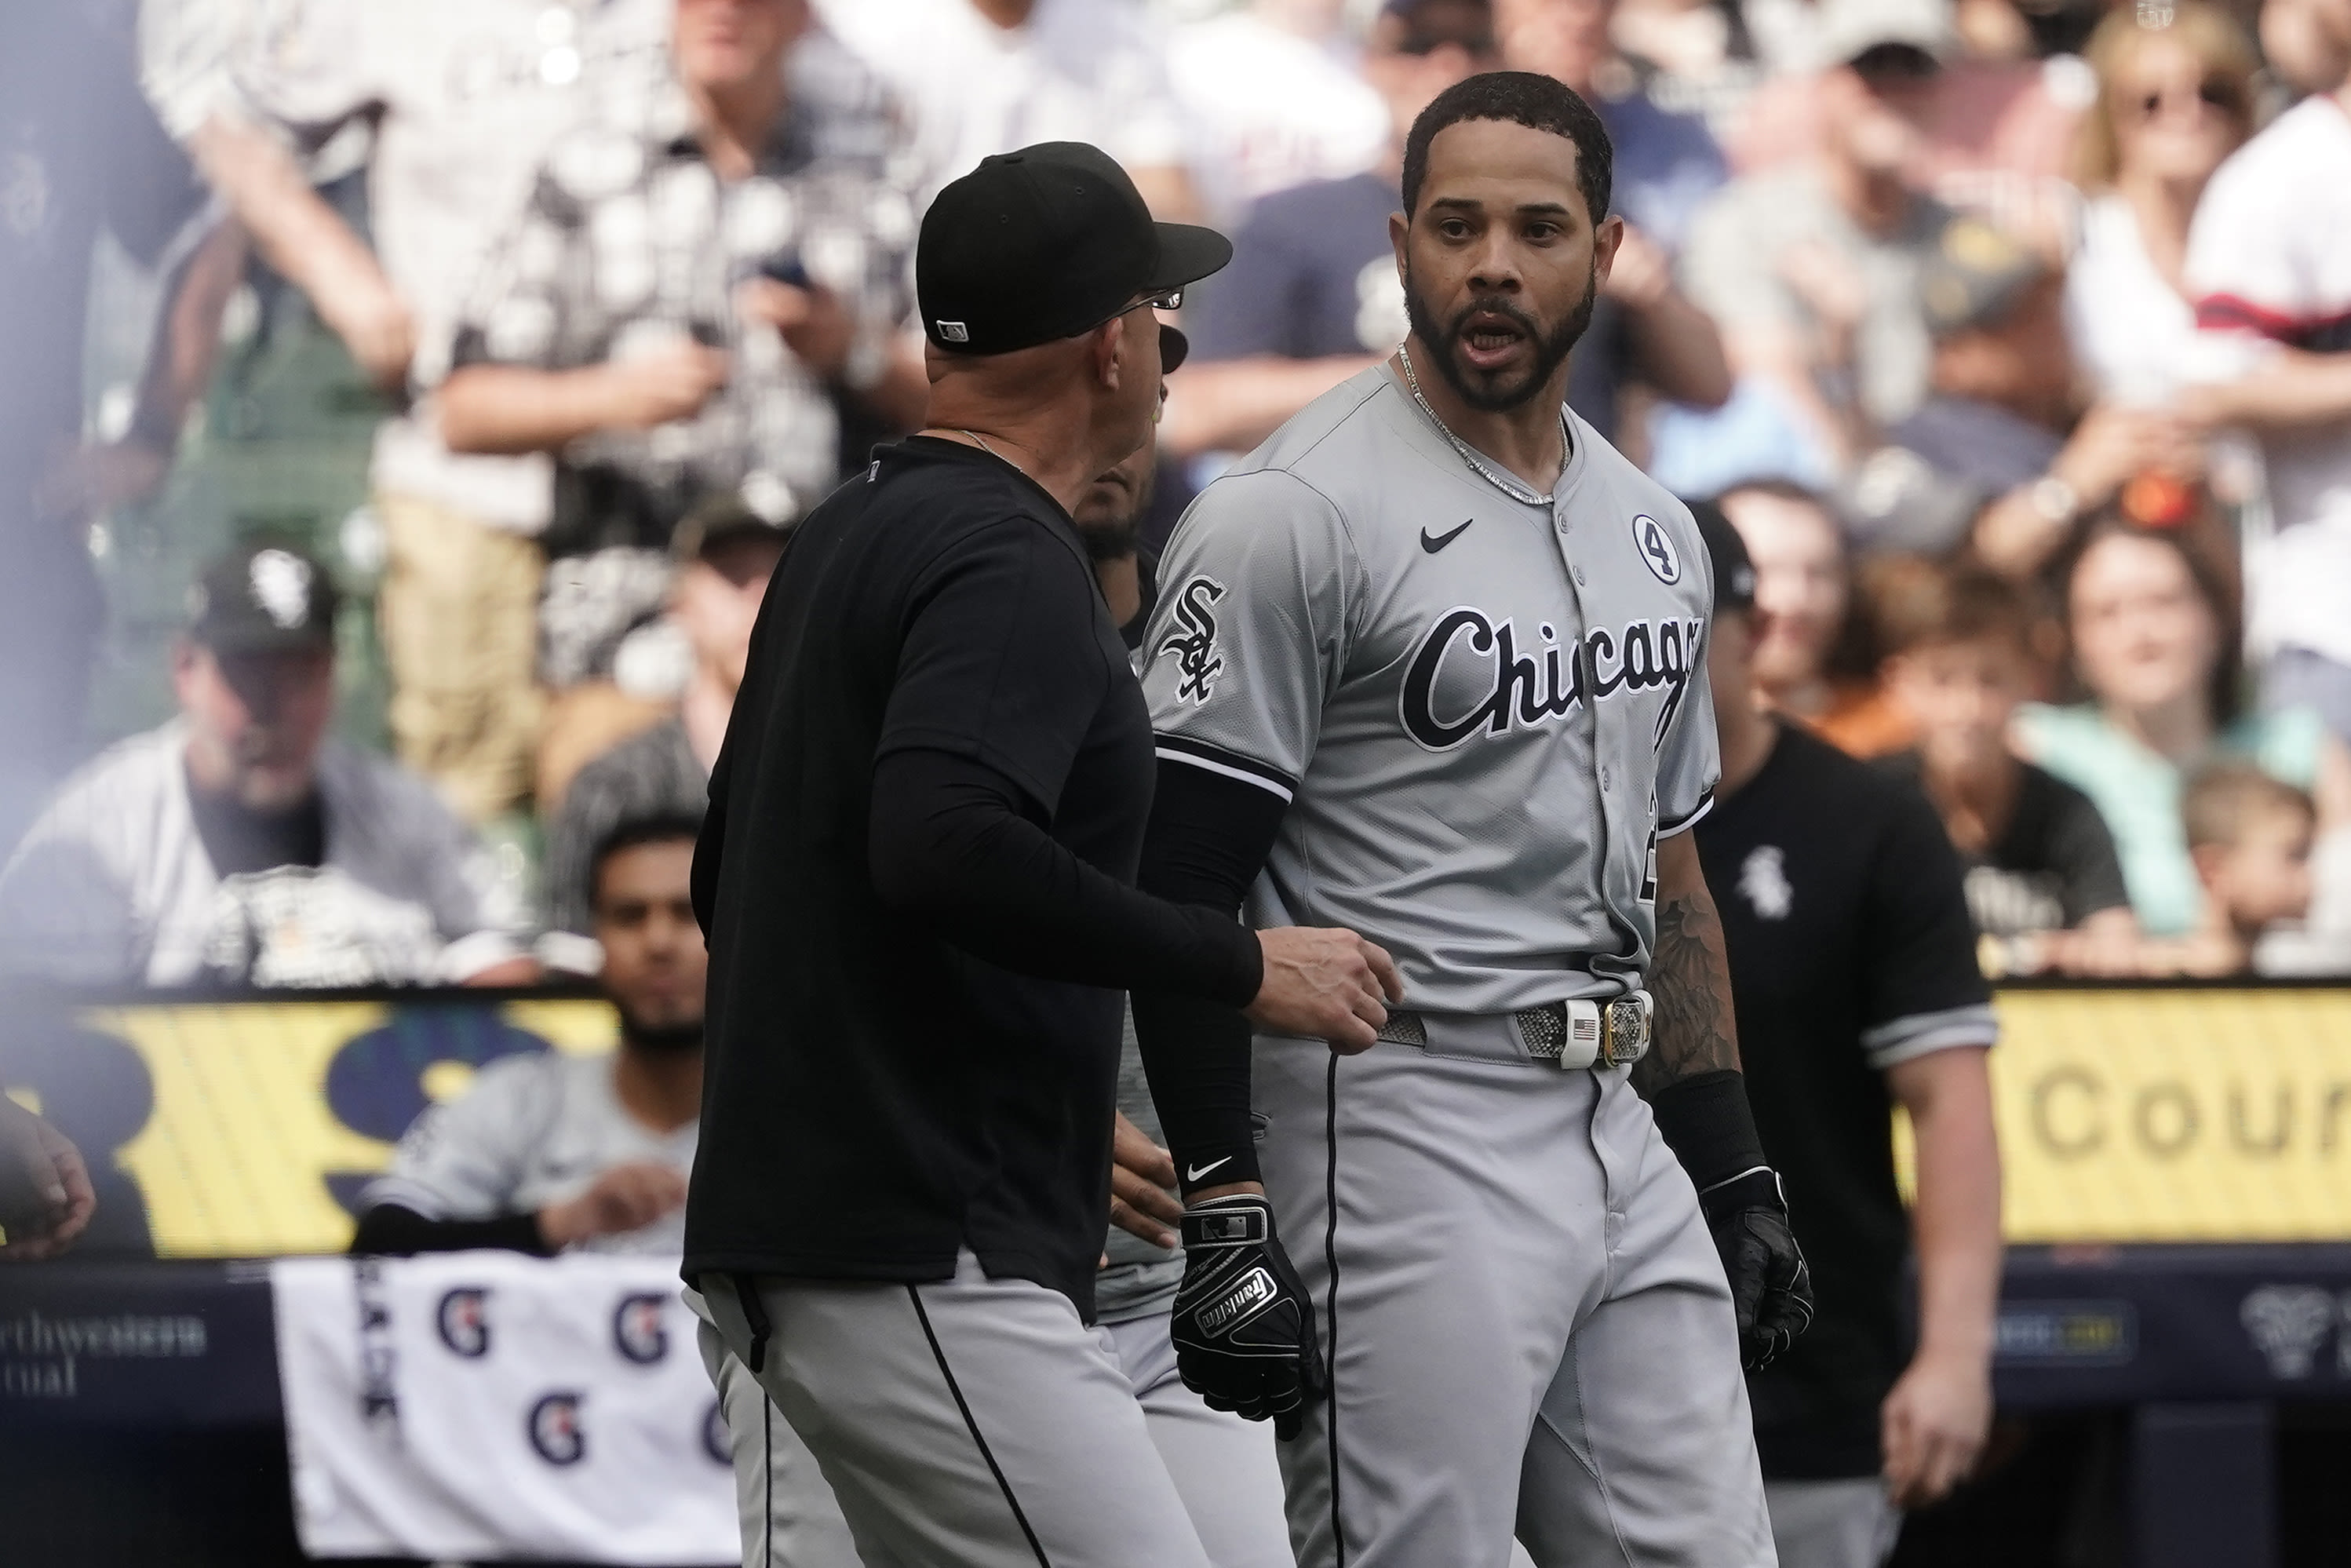 White Sox's Tommy Pham says he's always prepared to 'f*** somebody up' after confrontation with Brewers' William Contreras